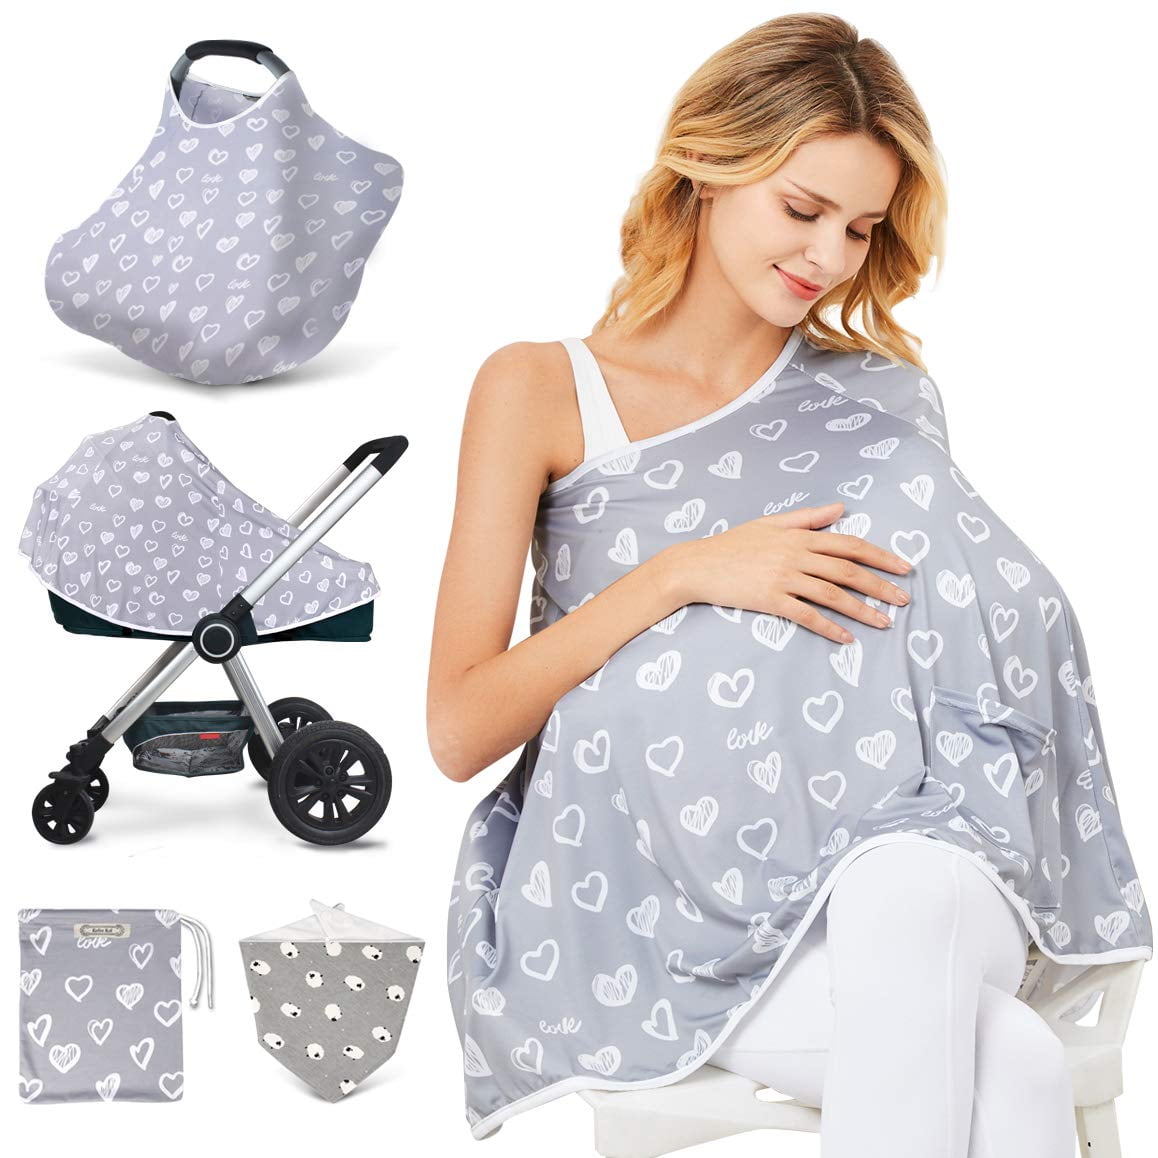 Stretchy 4-1 Baby Car Seat Canopy Nursing Cart Chair Stroller Cover Shower Gift 